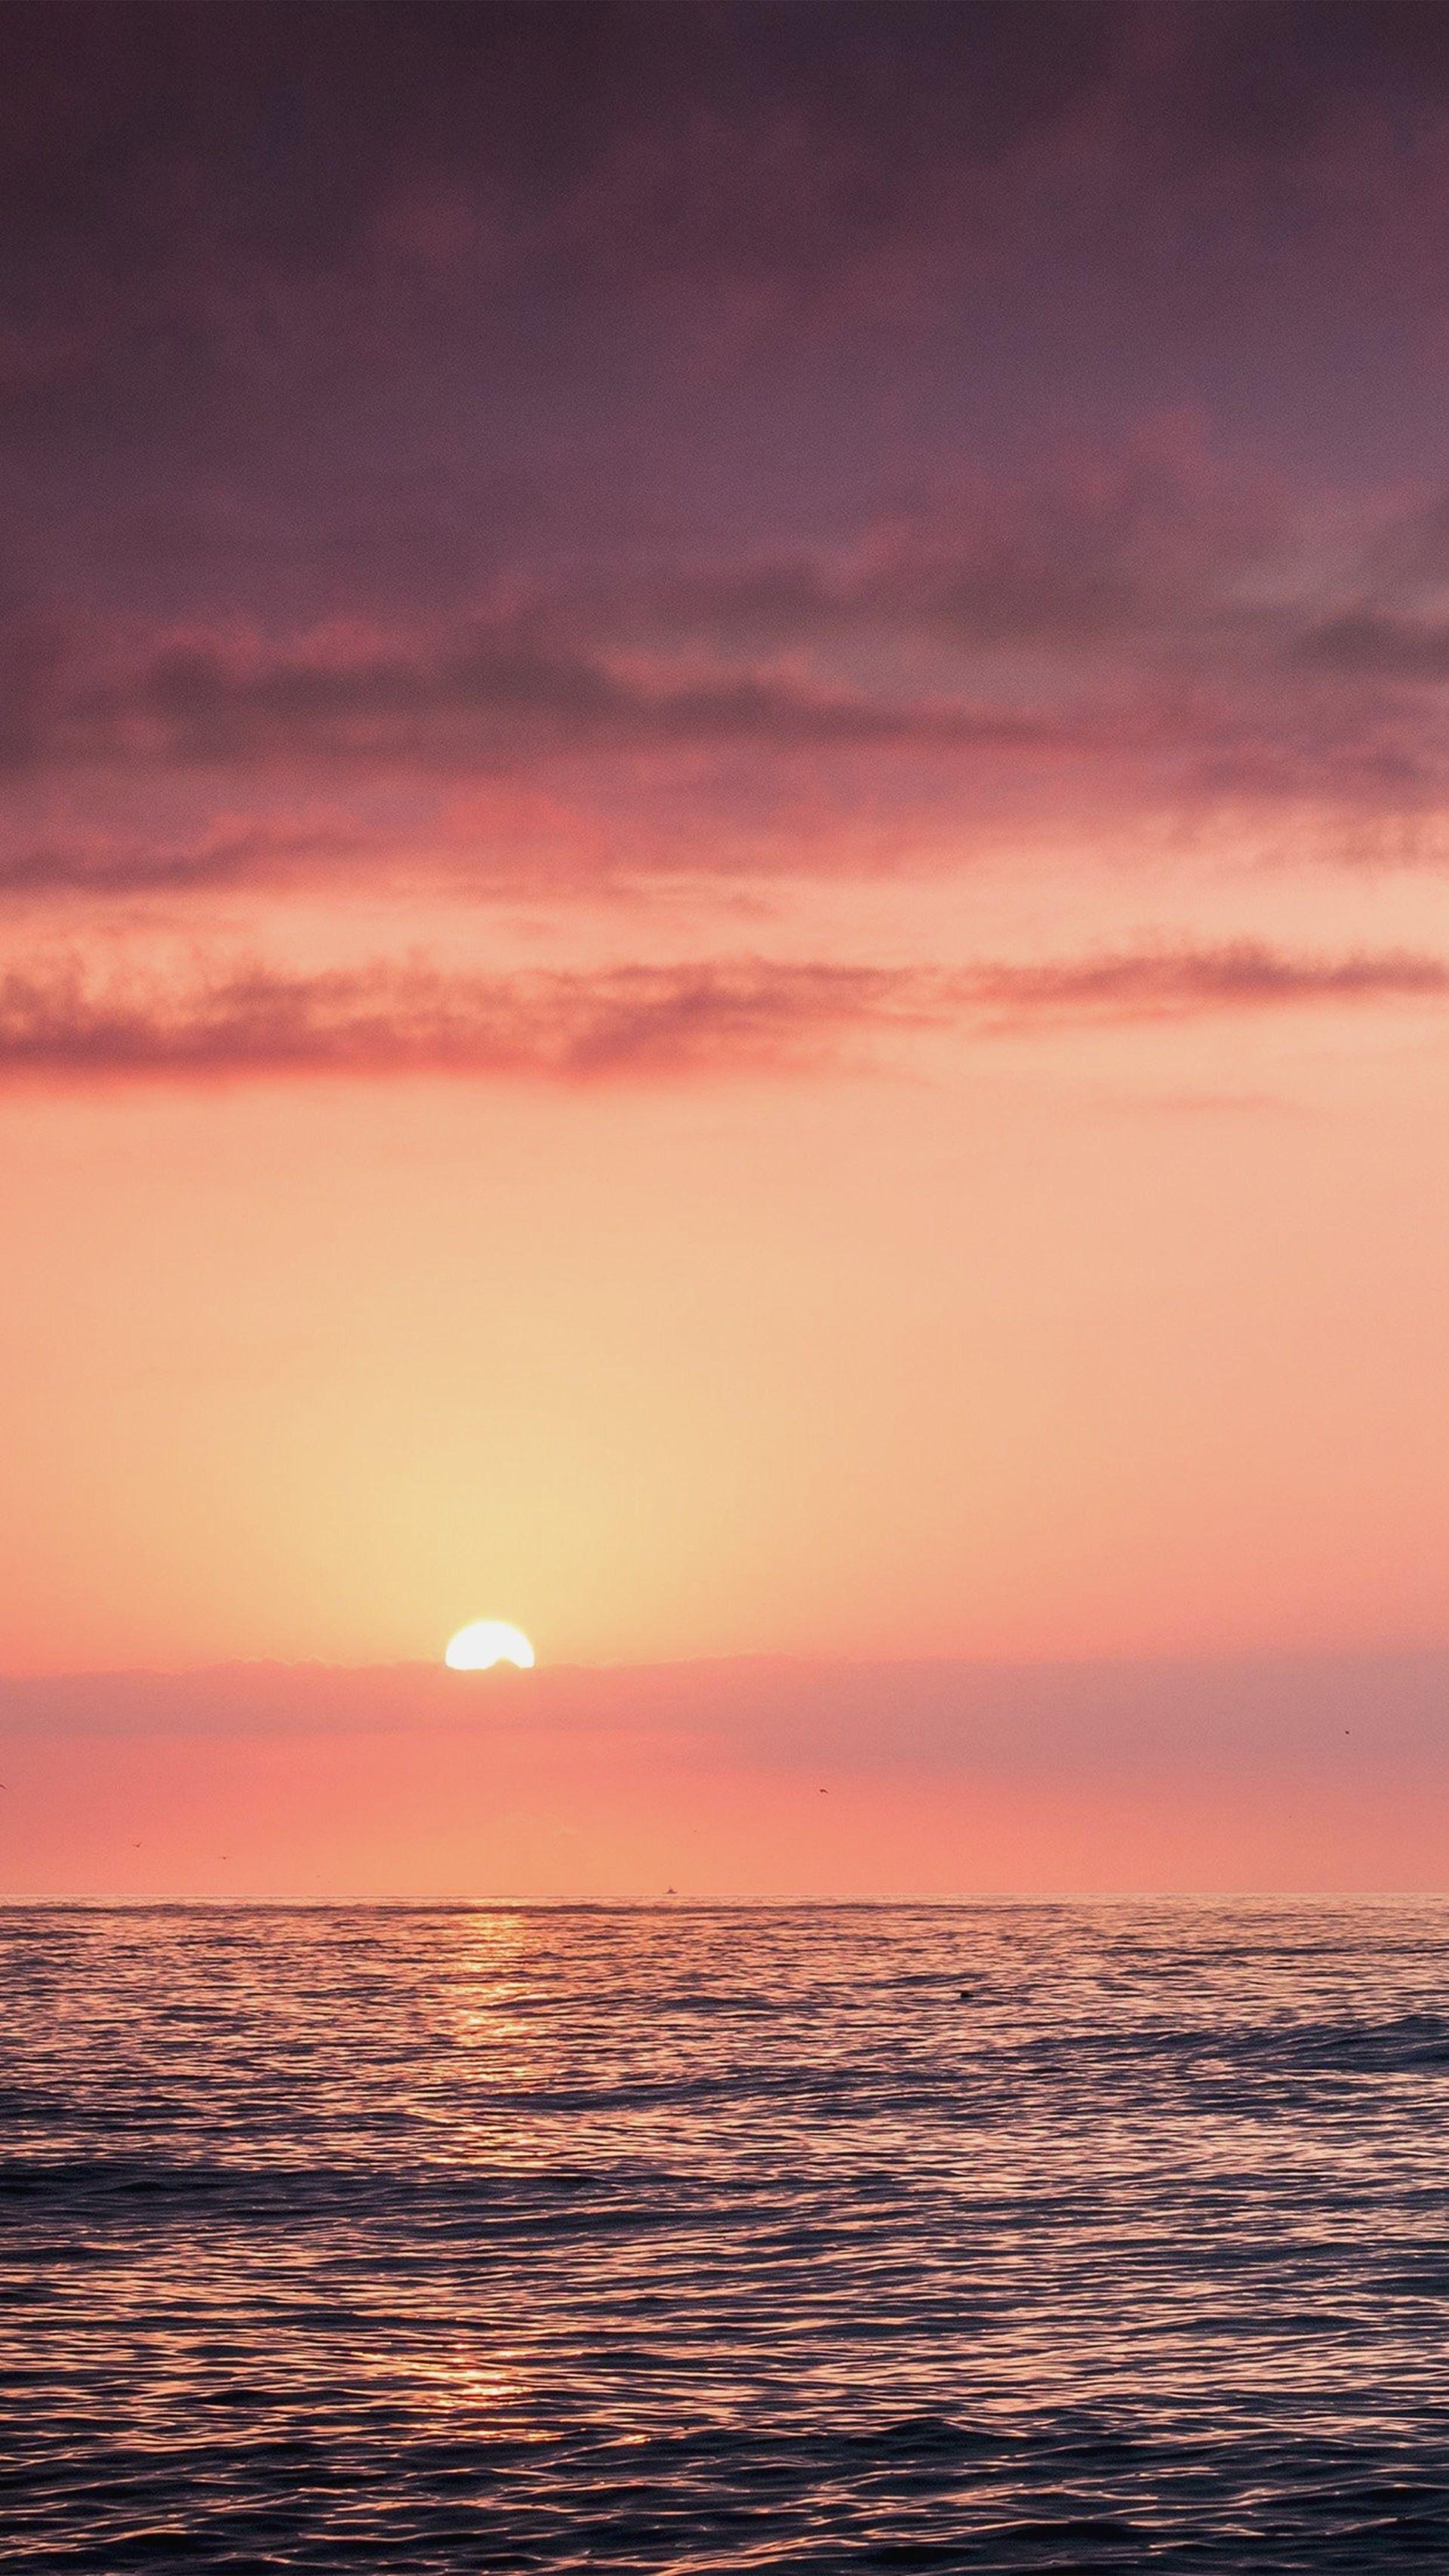 Pink Beach Sunset Iphone Wallpapers - Top Free Pink Beach Sunset Iphone